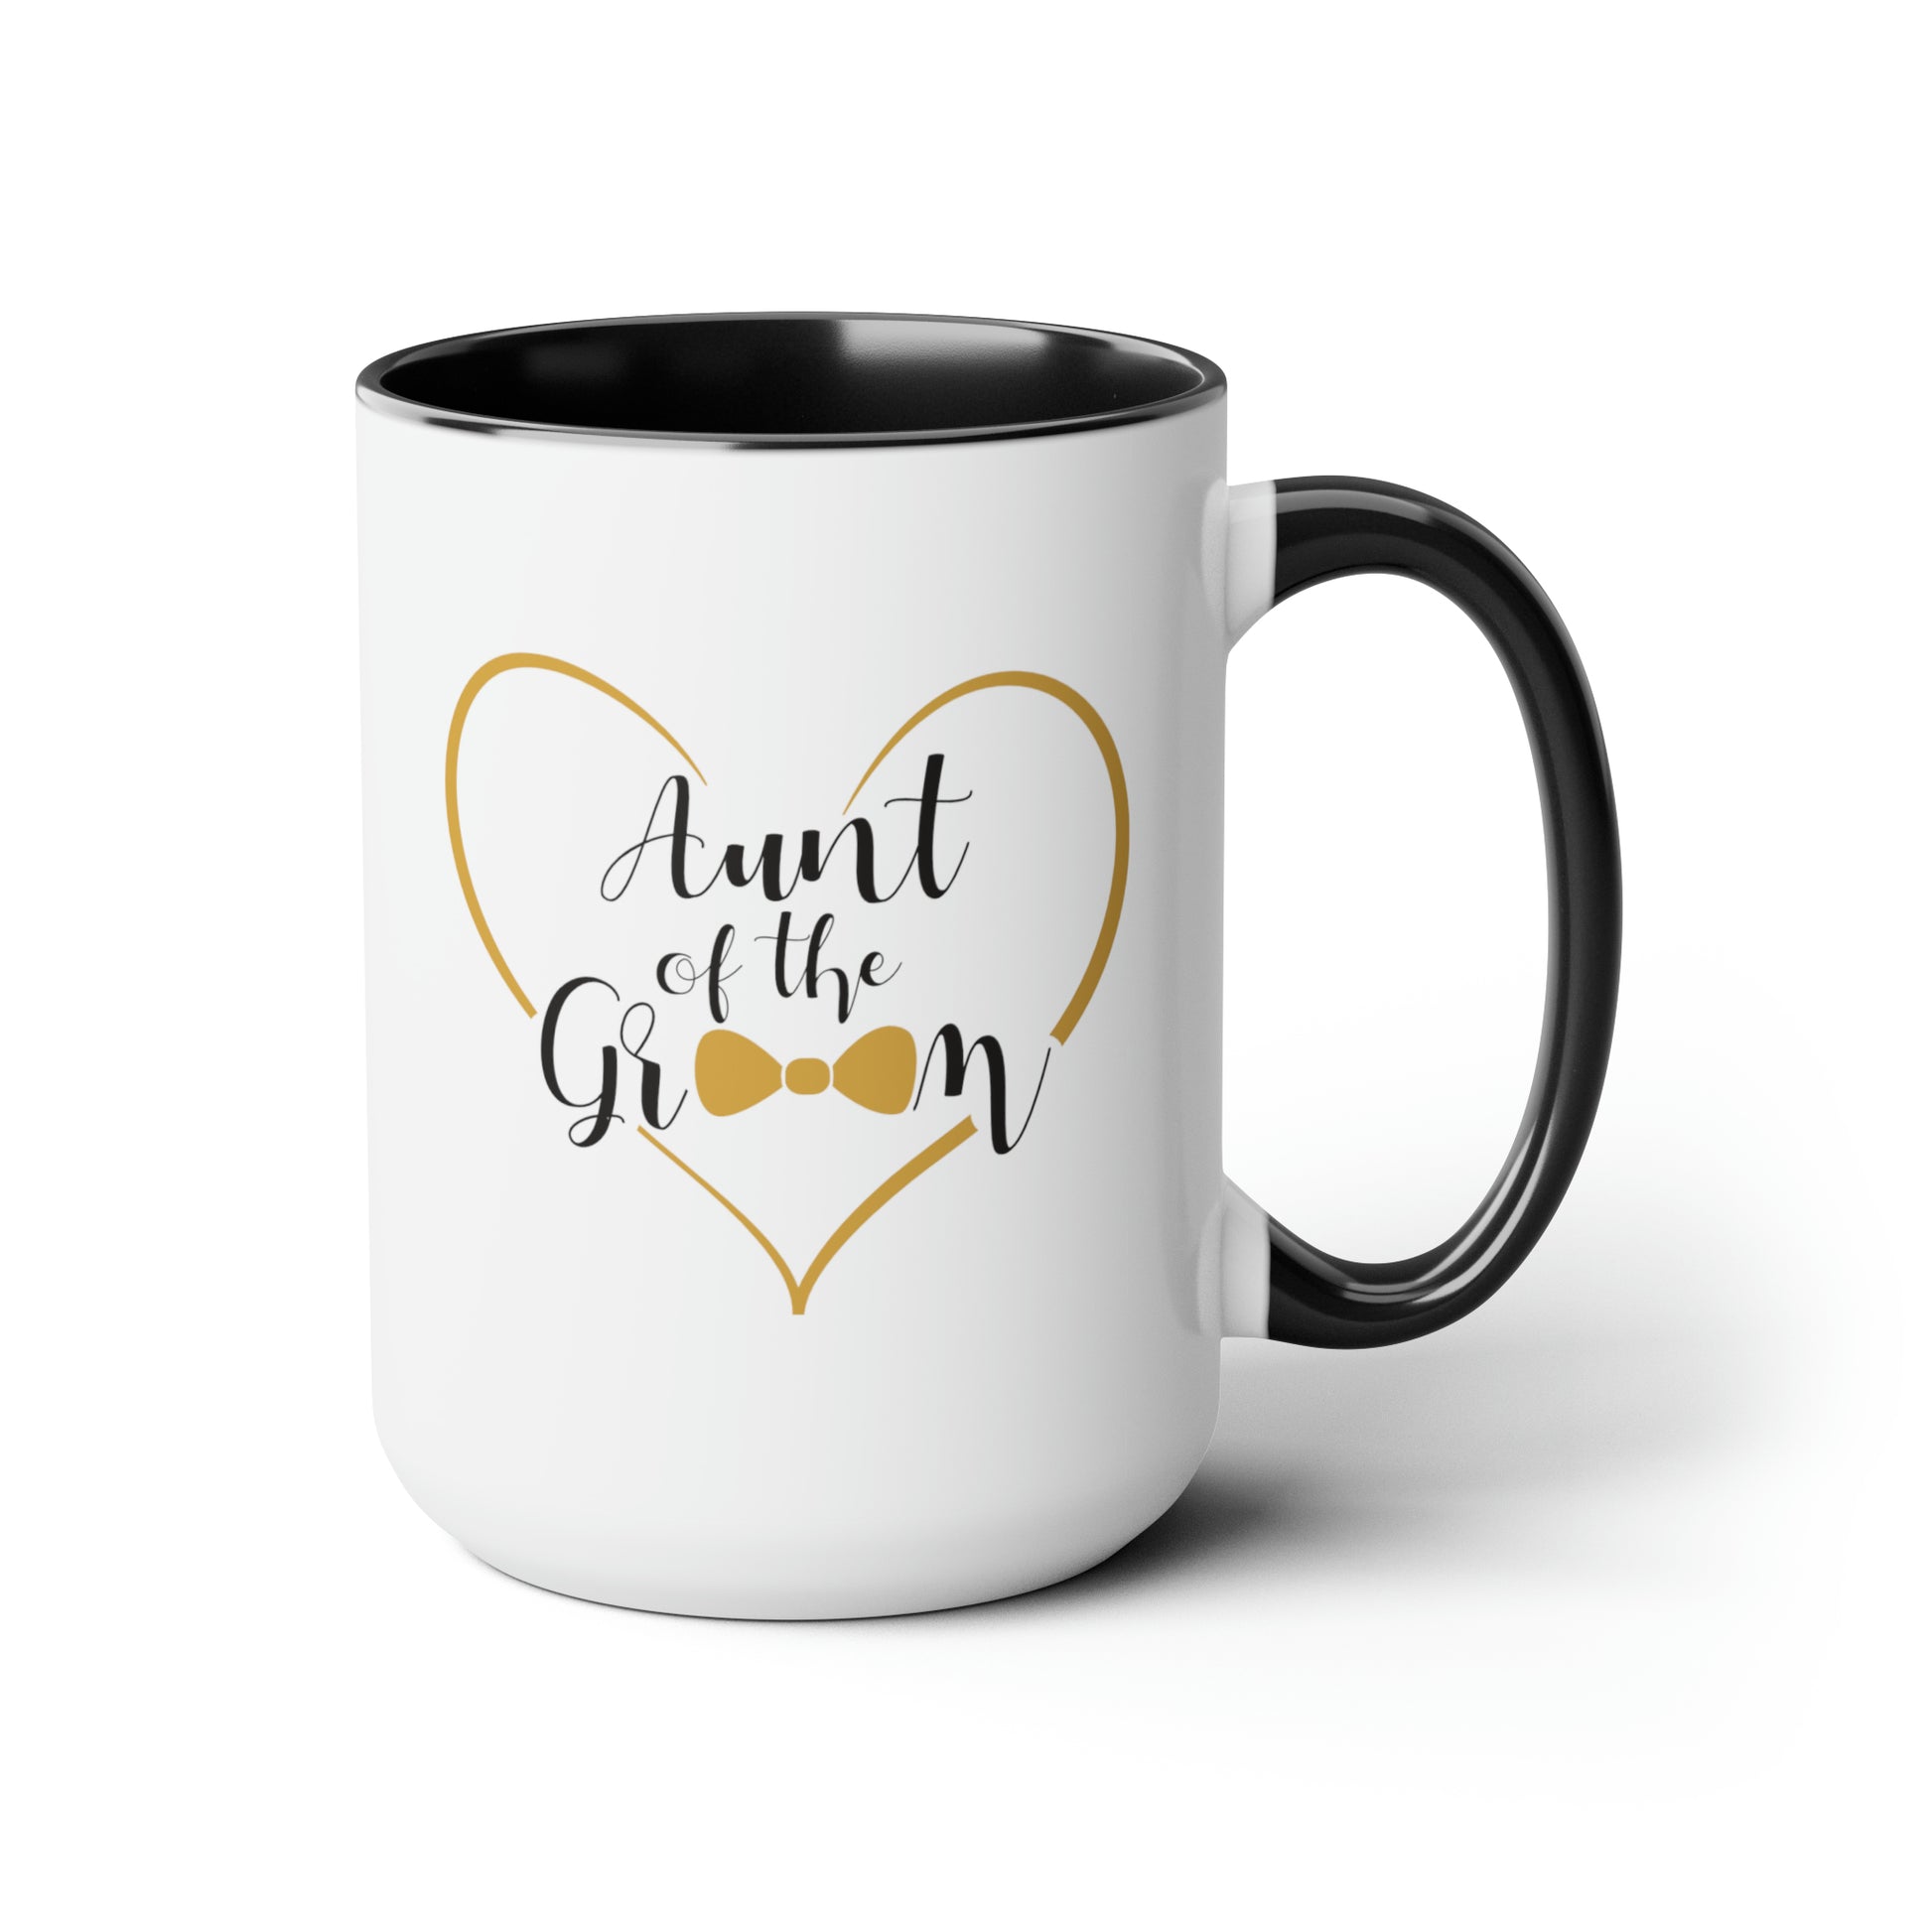 Aunt of the Groom Coffee Mug - Double Sided Black Accent Ceramic 15oz by TheGlassyLass.com